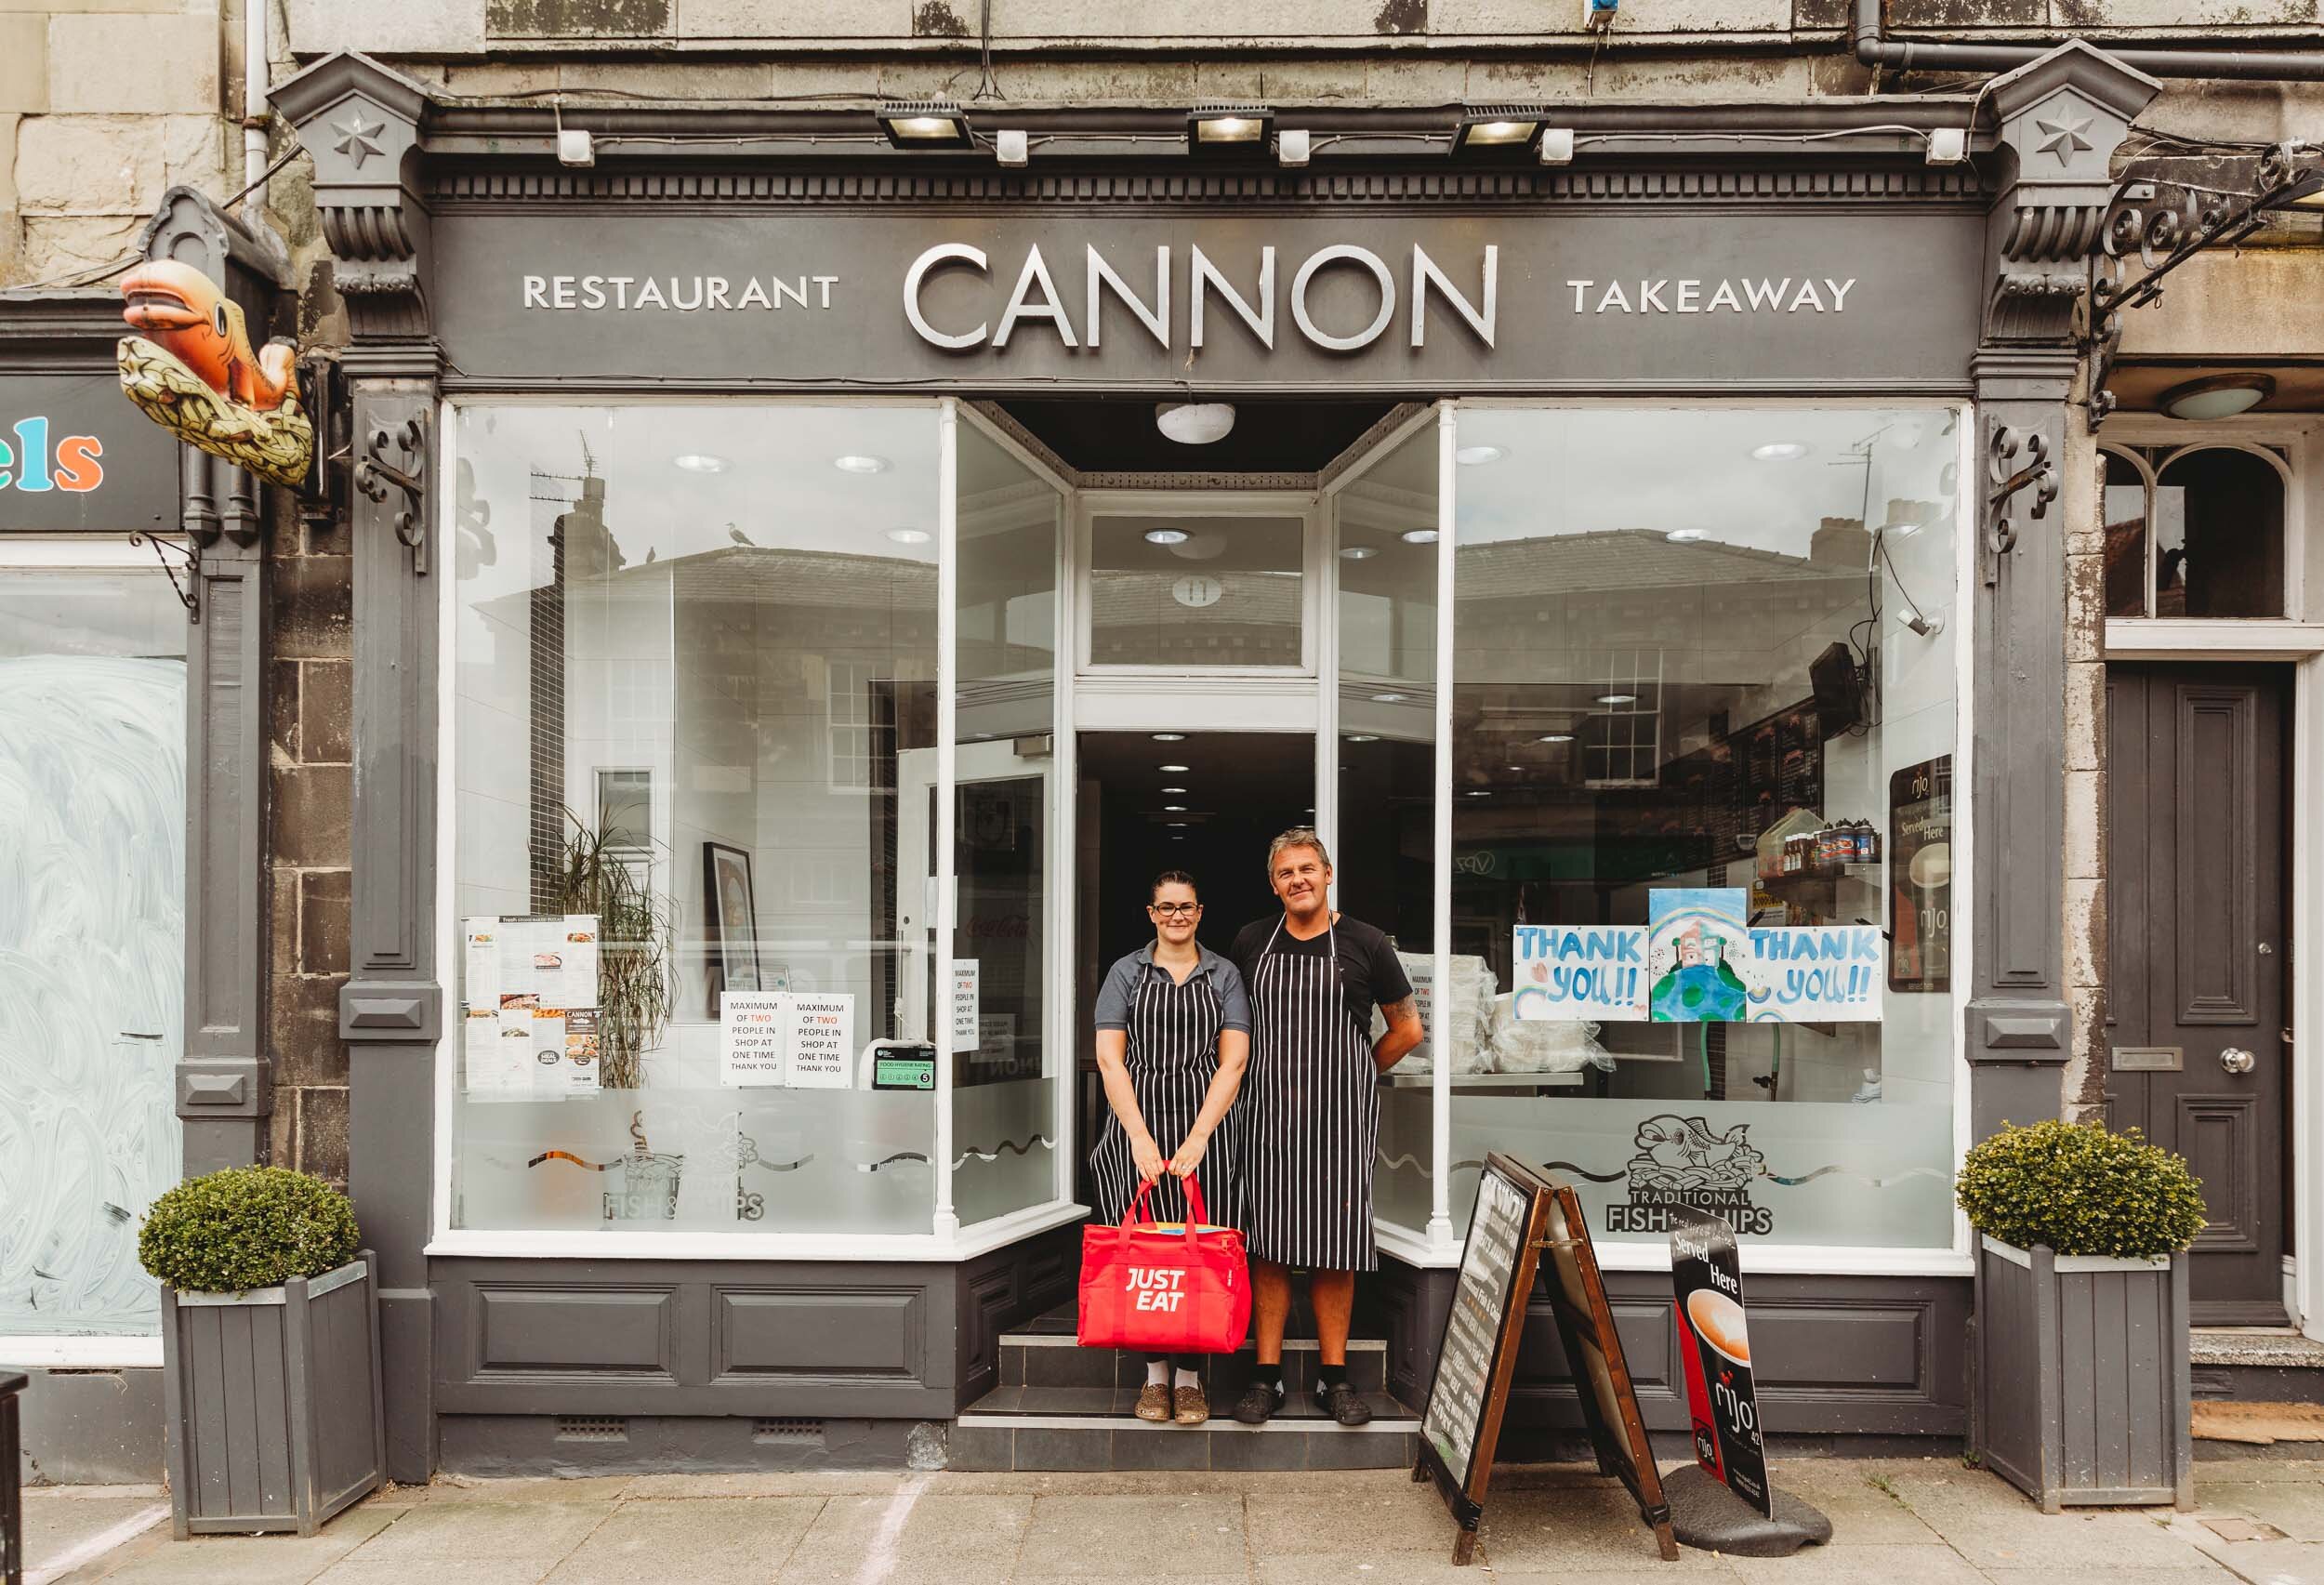  "We've been delivering free chips for NHS workers" - Cannon Chip Shop 